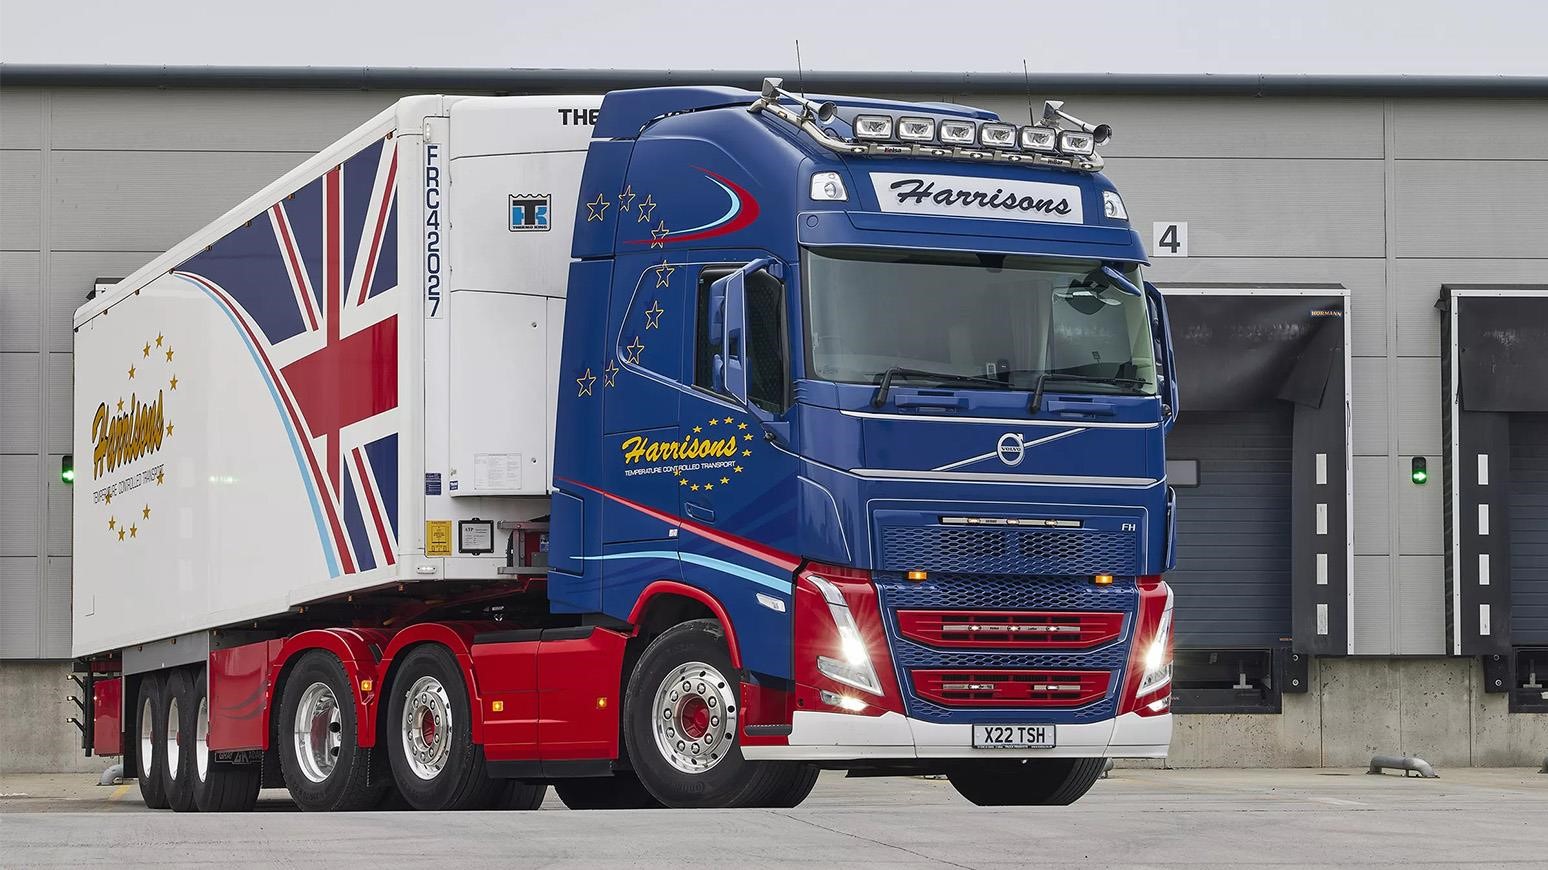 Reporting Good Fuel Economy From Volvo FH Trucks With I-Save, Transport Firm Orders 5 More